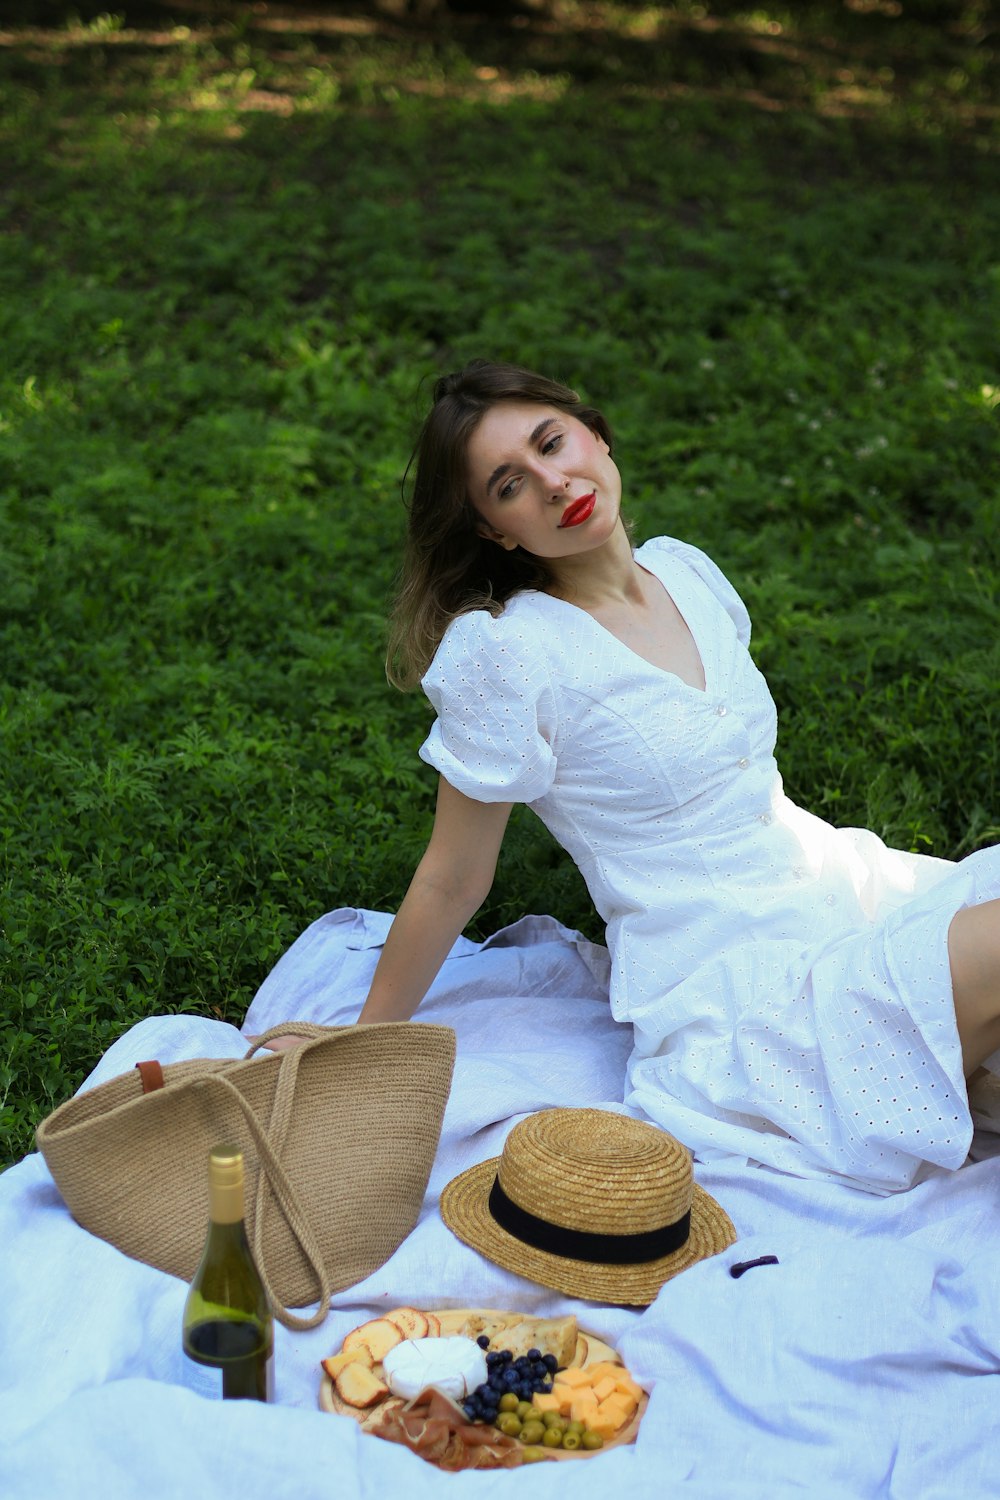 a woman in a white dress sitting on a blanket